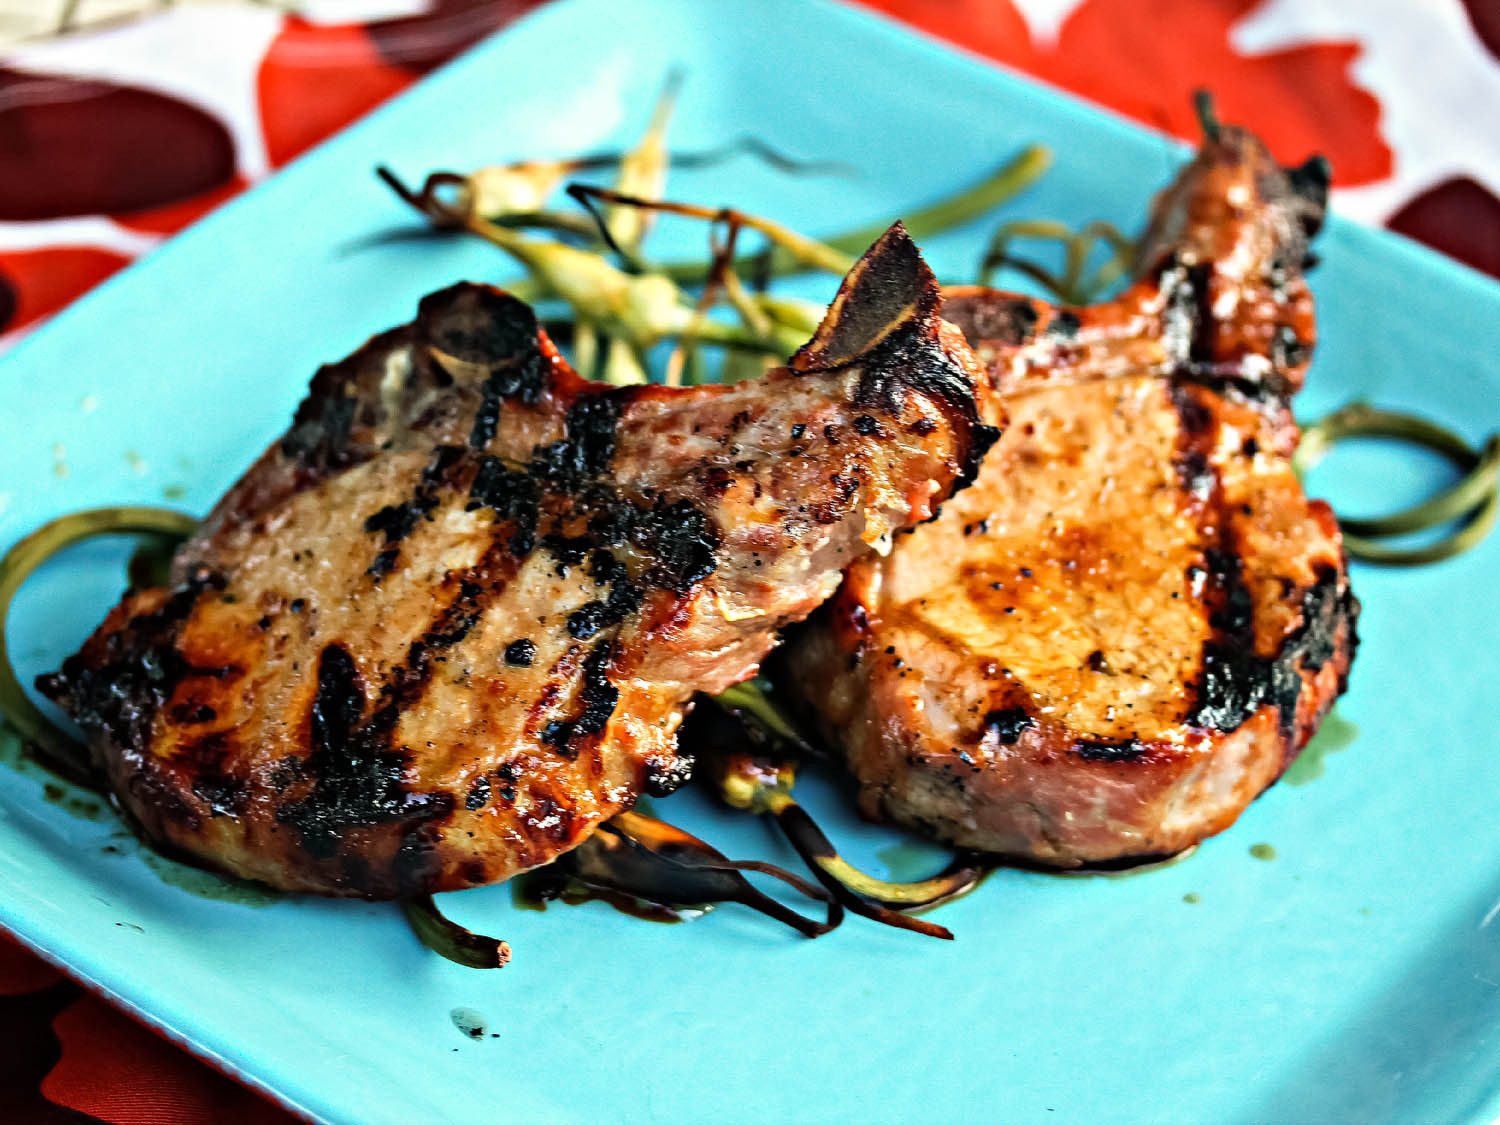 Pork Chops On The Grill Recipes
 Crispin Cider Brined and Glazed Grilled Pork Chops Recipe